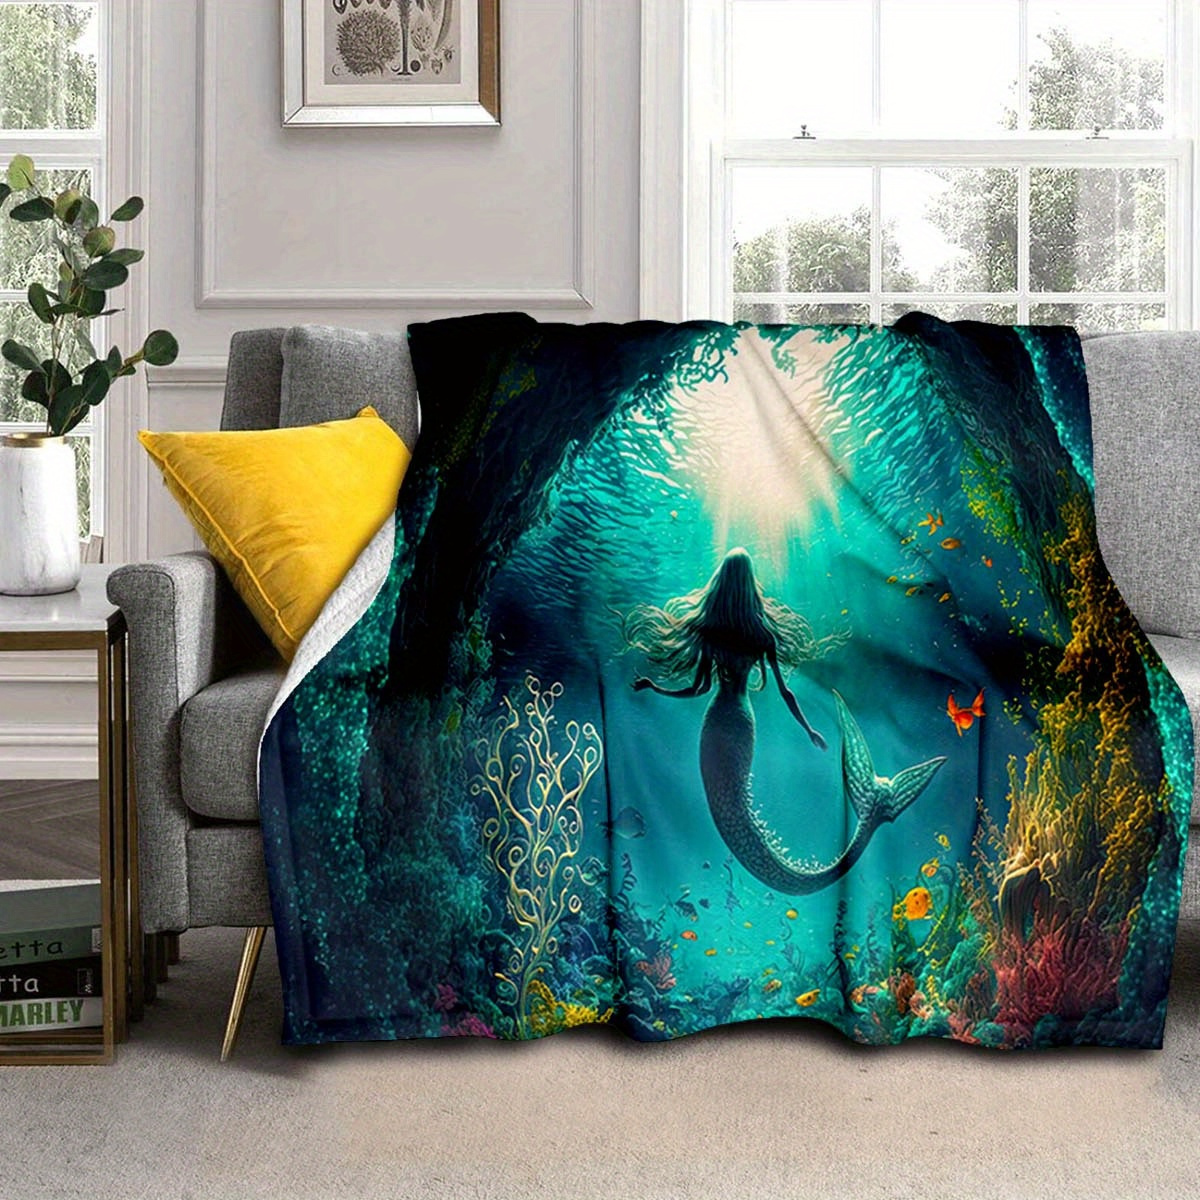 

1pc Soft Polyester Mermaid Print Throw Blanket - Cozy Warm 3d Pattern Nap Blanket For Home, Office, Car, Camping, Travel - Multi-purpose All-season Gift Blanket